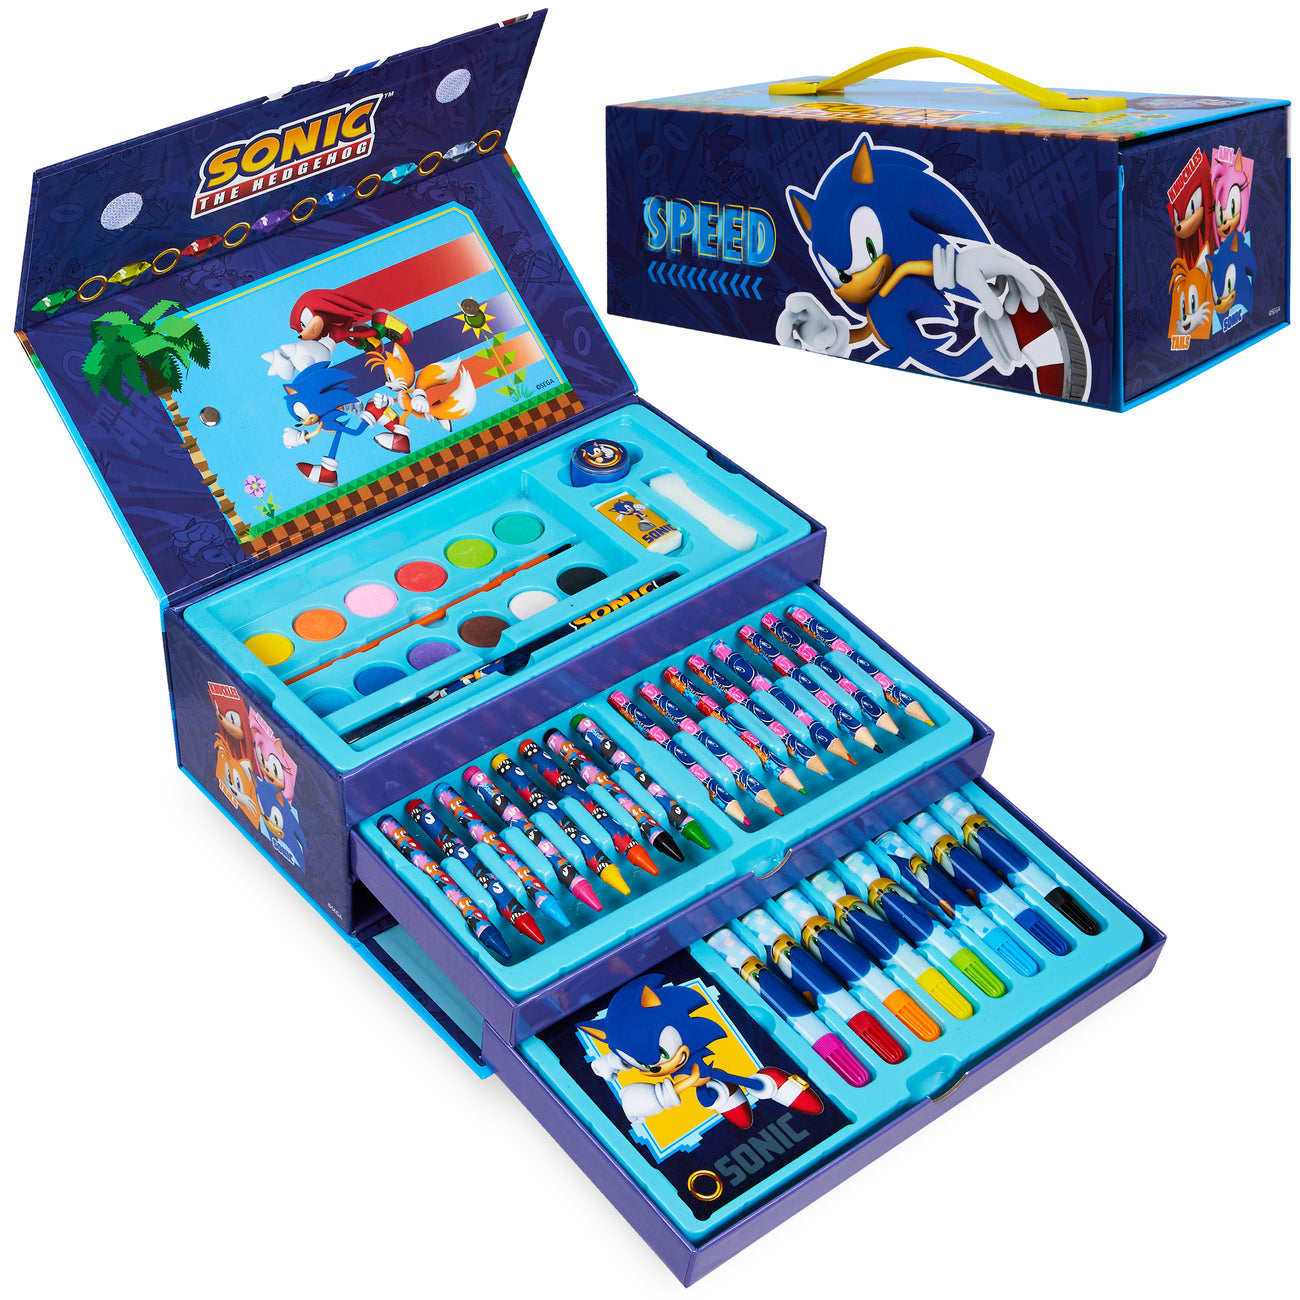 Game Party Sonic The Hedgehog Drawing and Painting Set for Boys - Sonic Gift Bundle with Coloring Book, Coloring Utensils, Watercolor Paints, Stickers